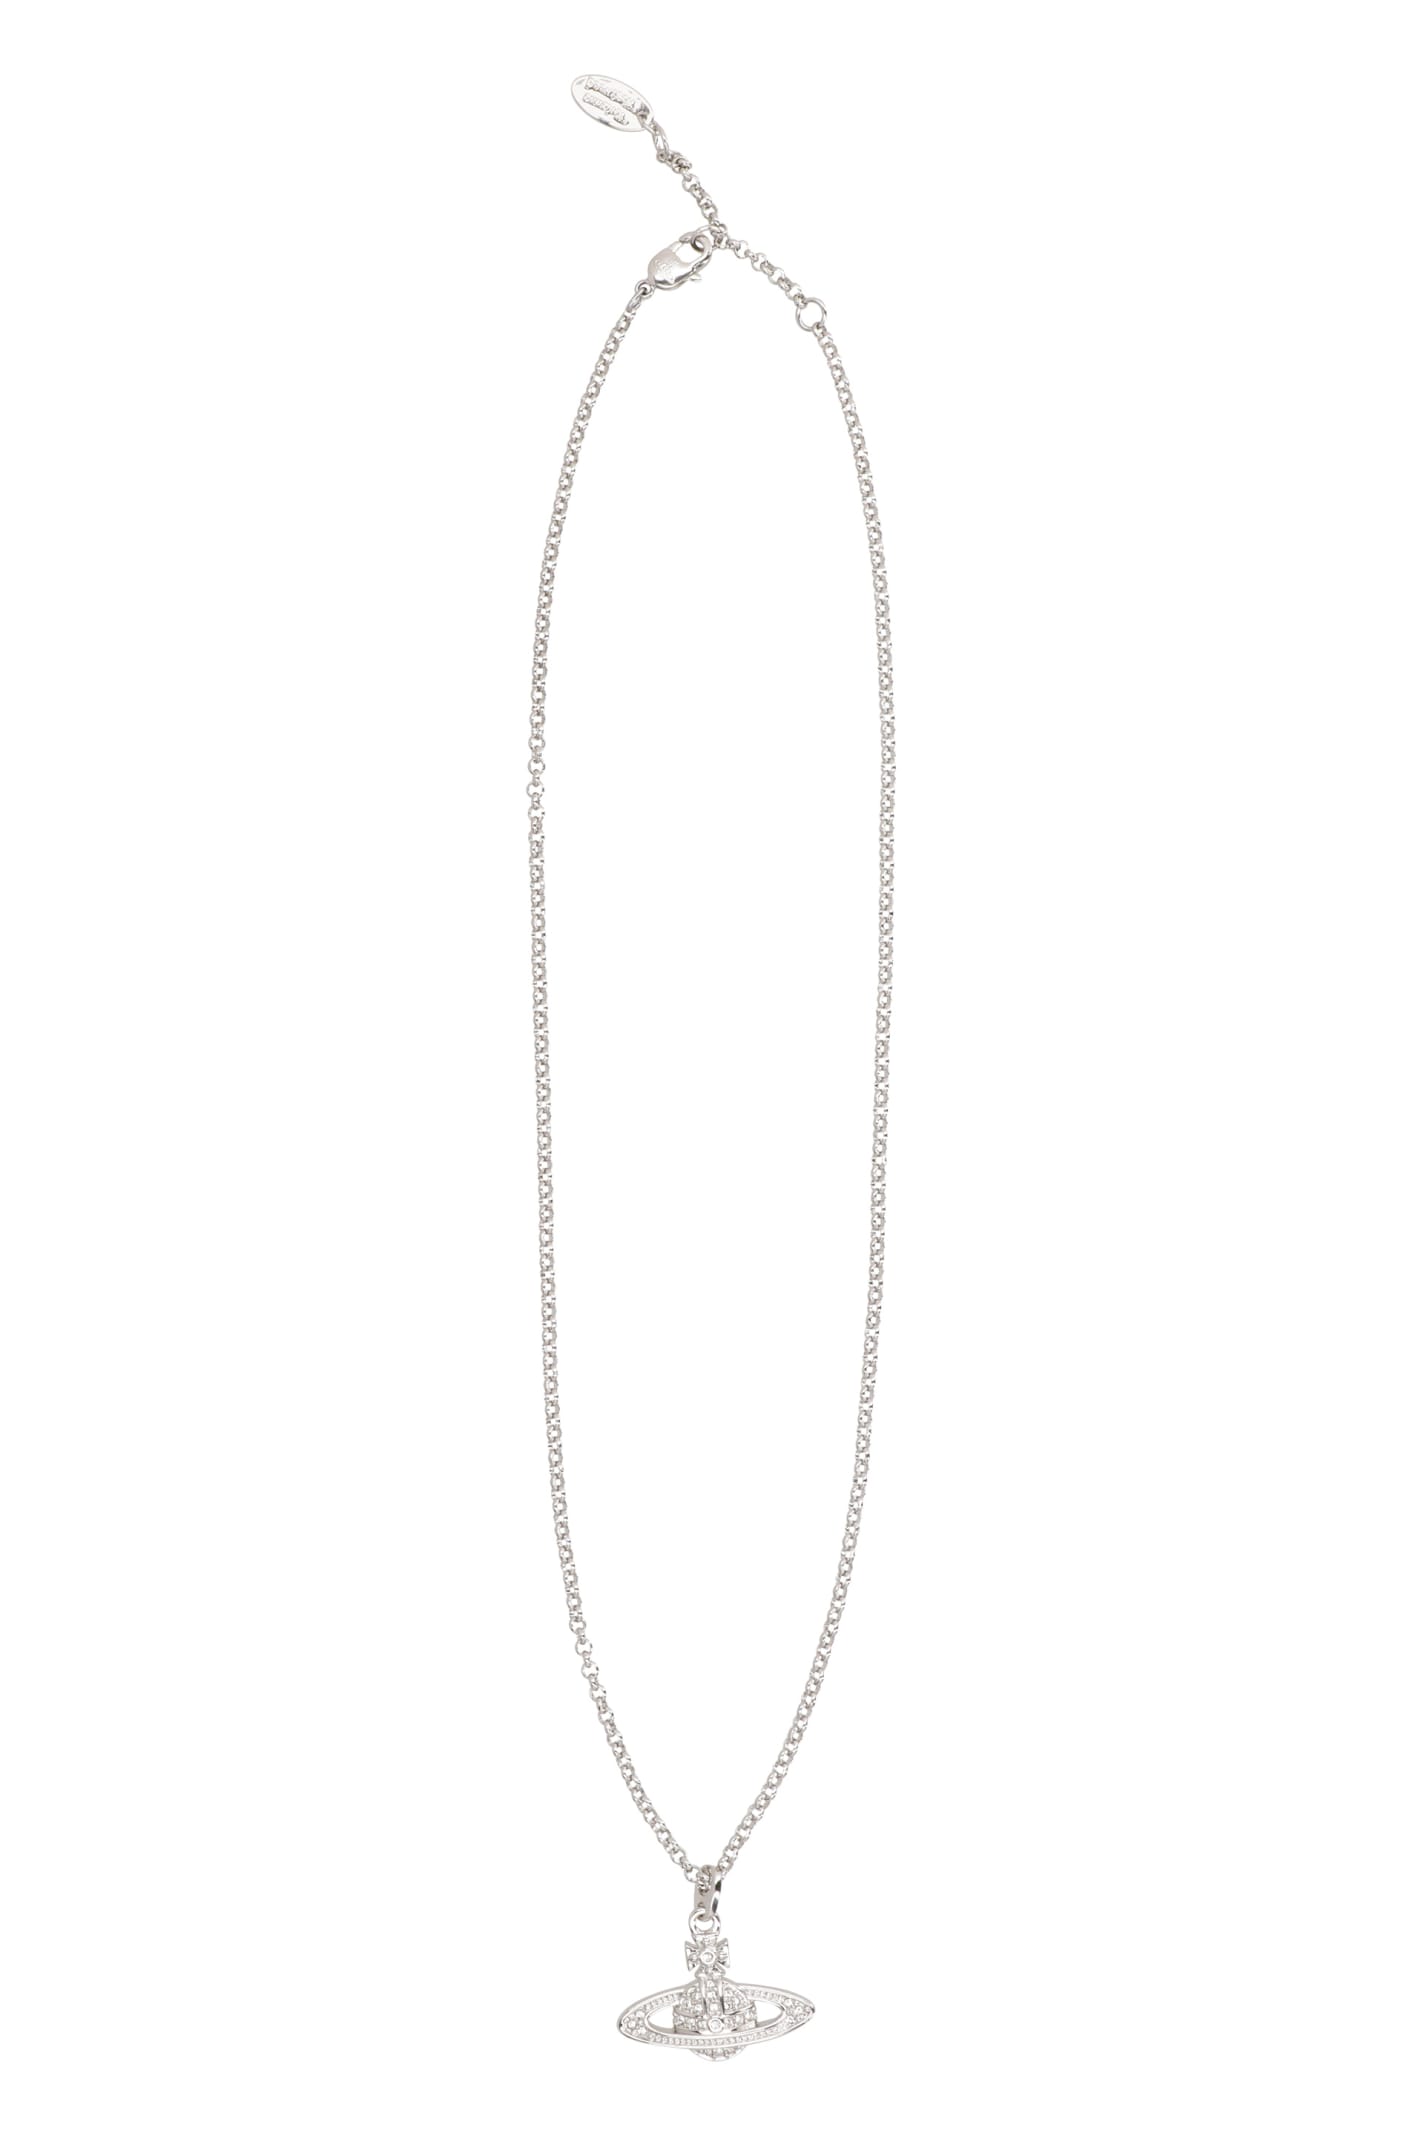 VIVIENNE WESTWOOD SILVER PLATED METAL NECKLACE